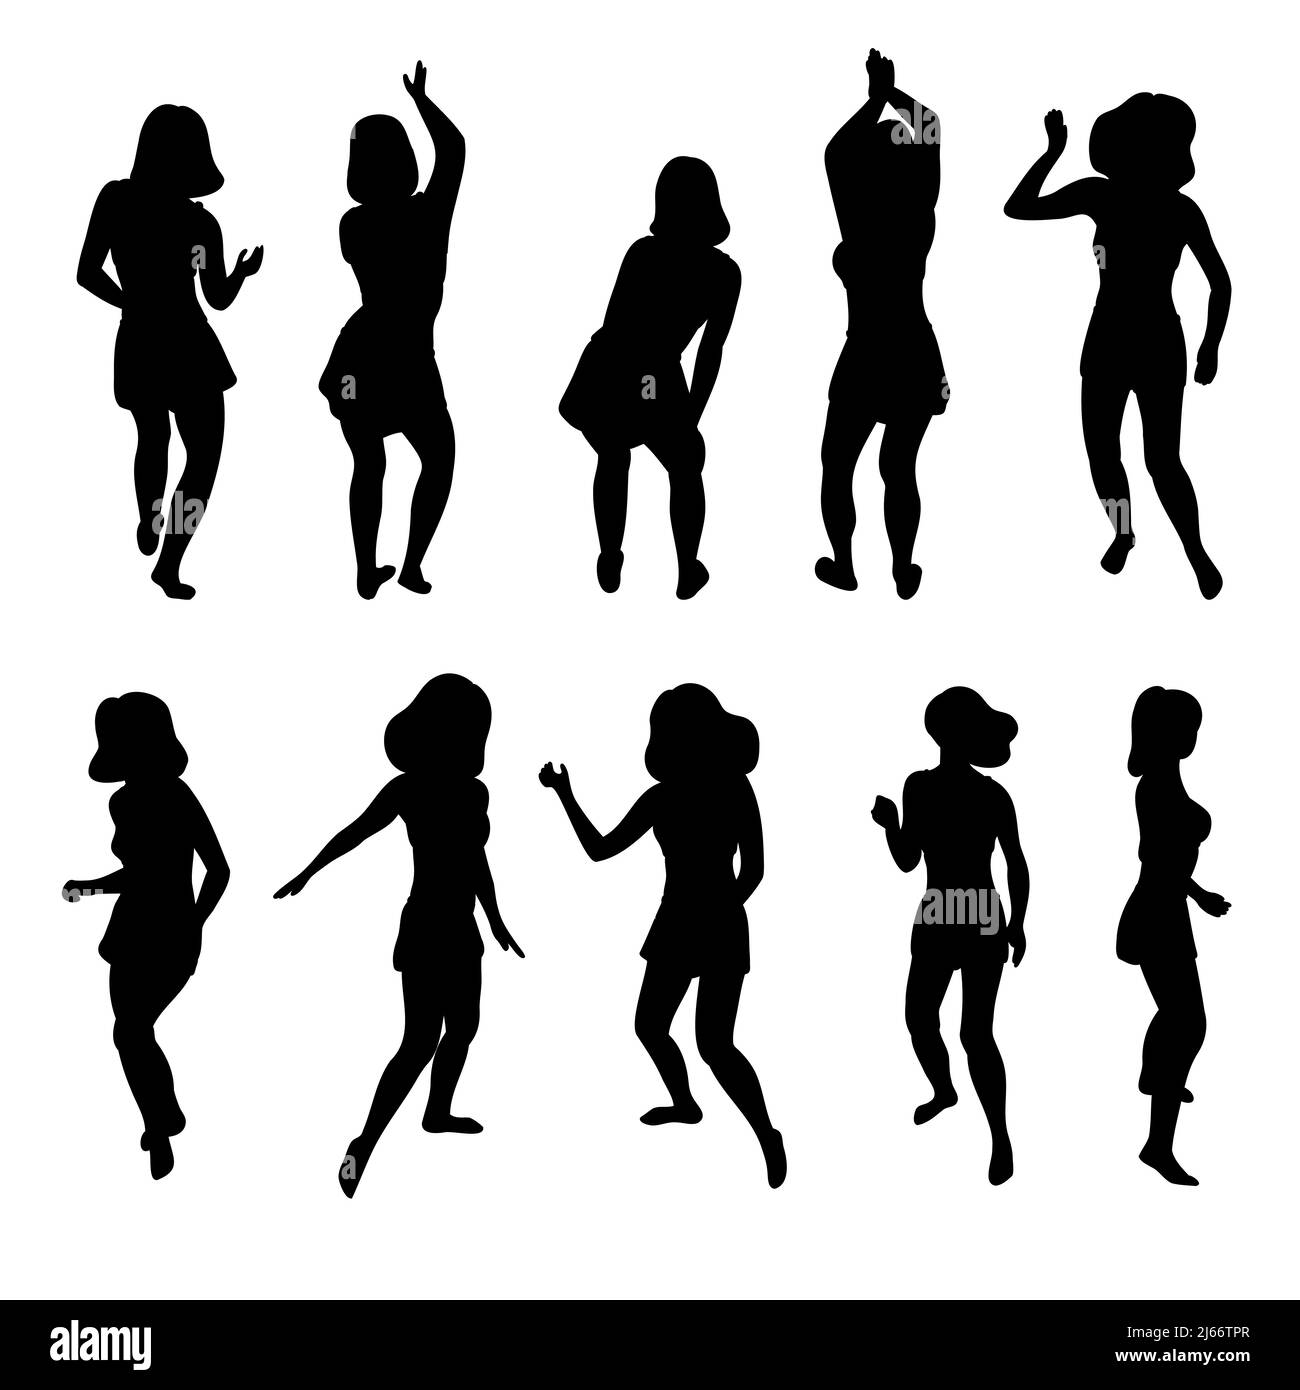 Short skirt women dancing black silhouettes. Set of moving disco girl shapes. Party abstract poses. Vector illustration for flyer, poster, card, holiday concept. Stock Vector